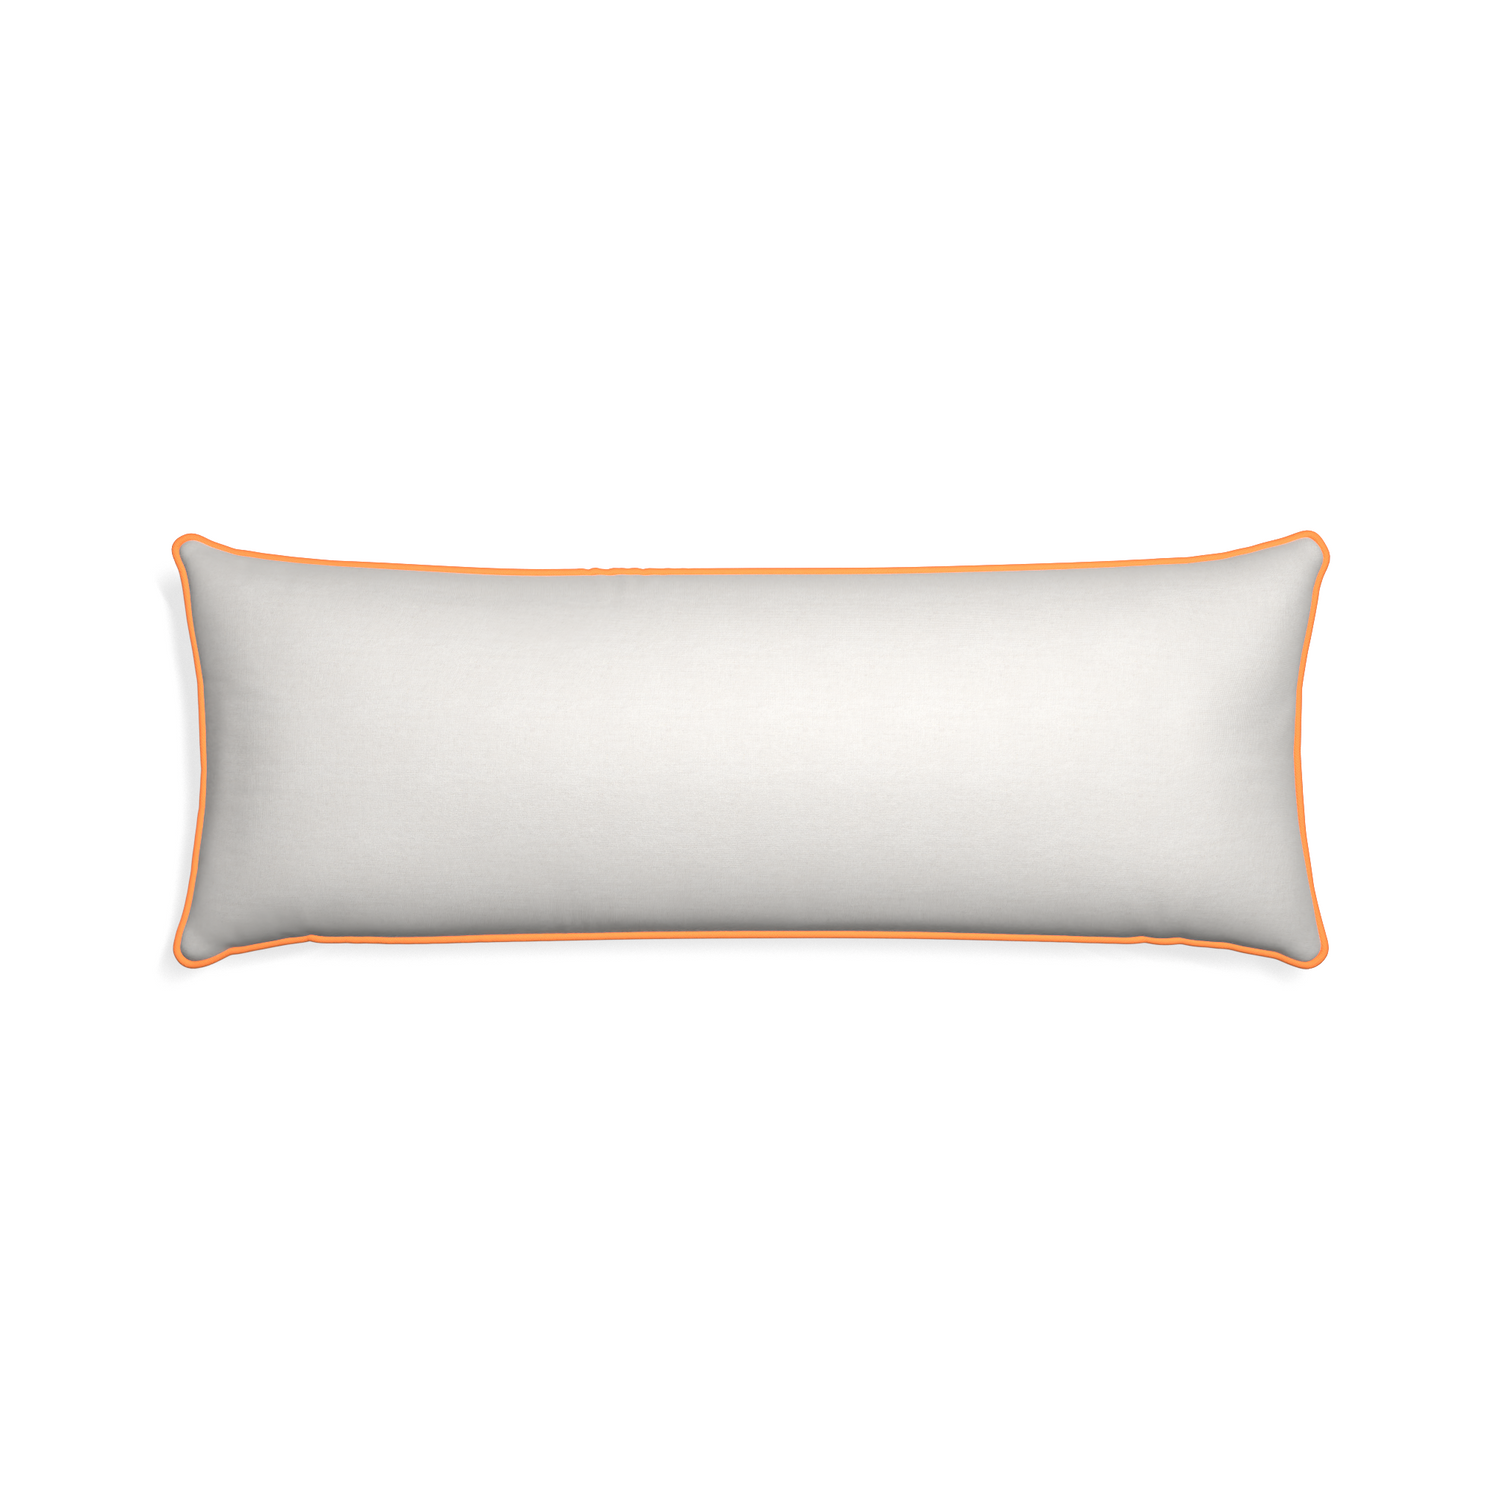 Xl-lumbar flour custom pillow with clementine piping on white background